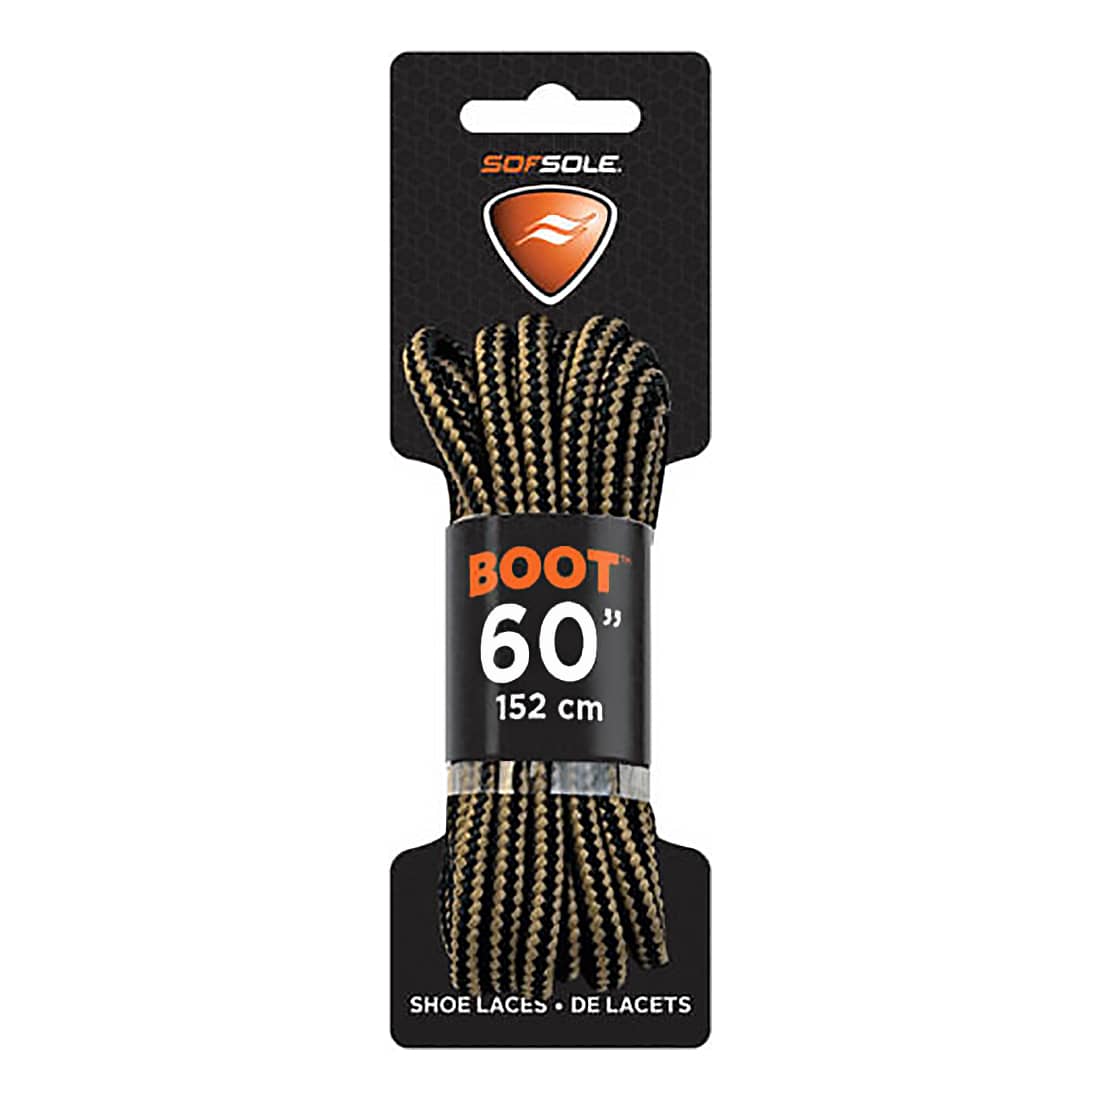 Sof Sole Waxed Boot Laces - 60" - Black/Tan